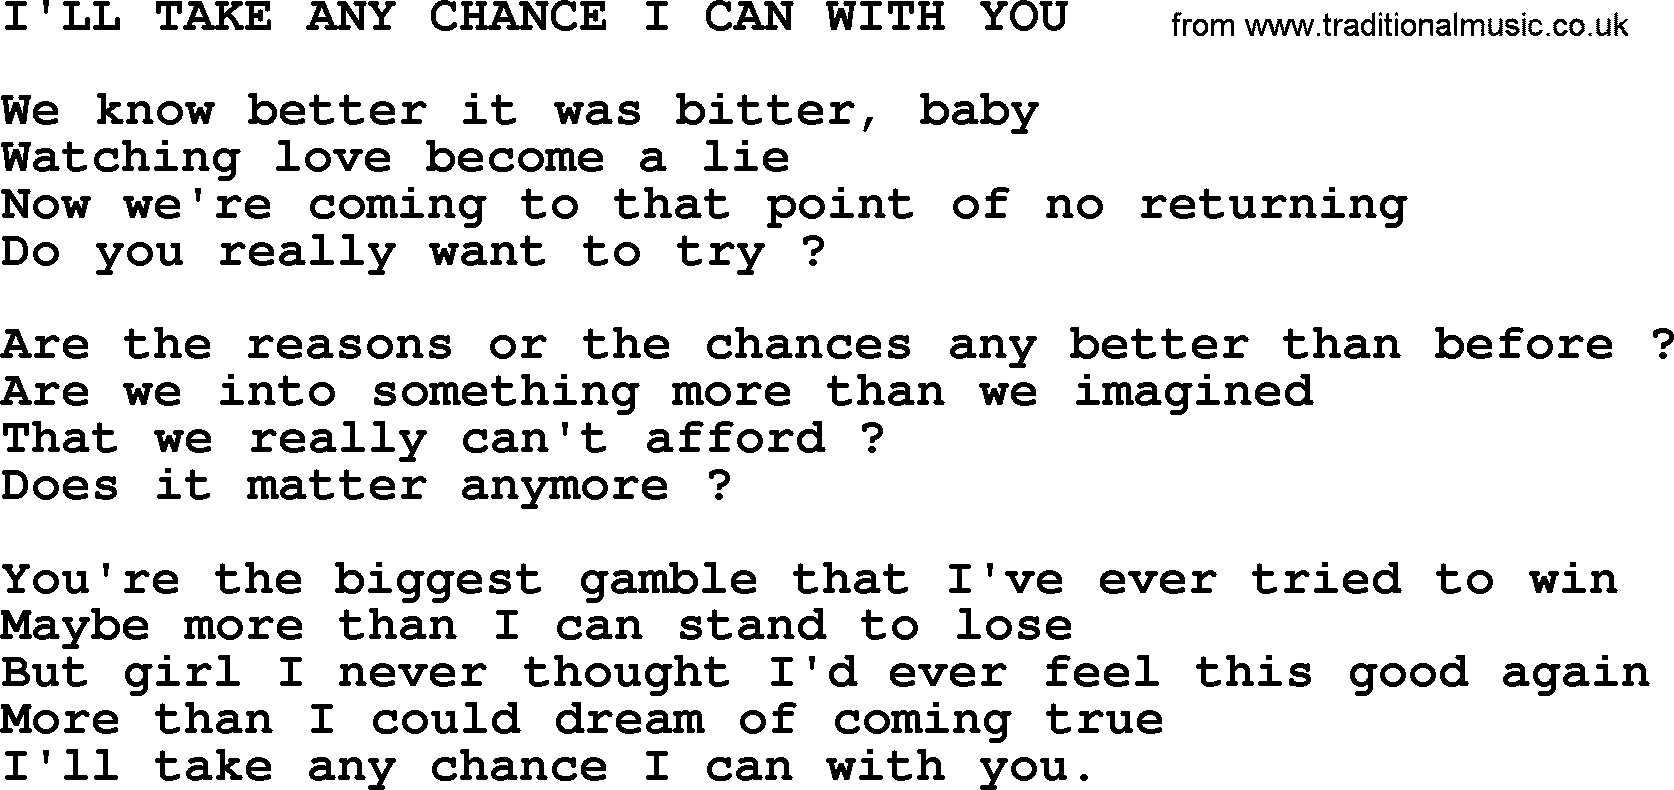 Kris Kristofferson song: I'll Take Any Chance I Can With You lyrics